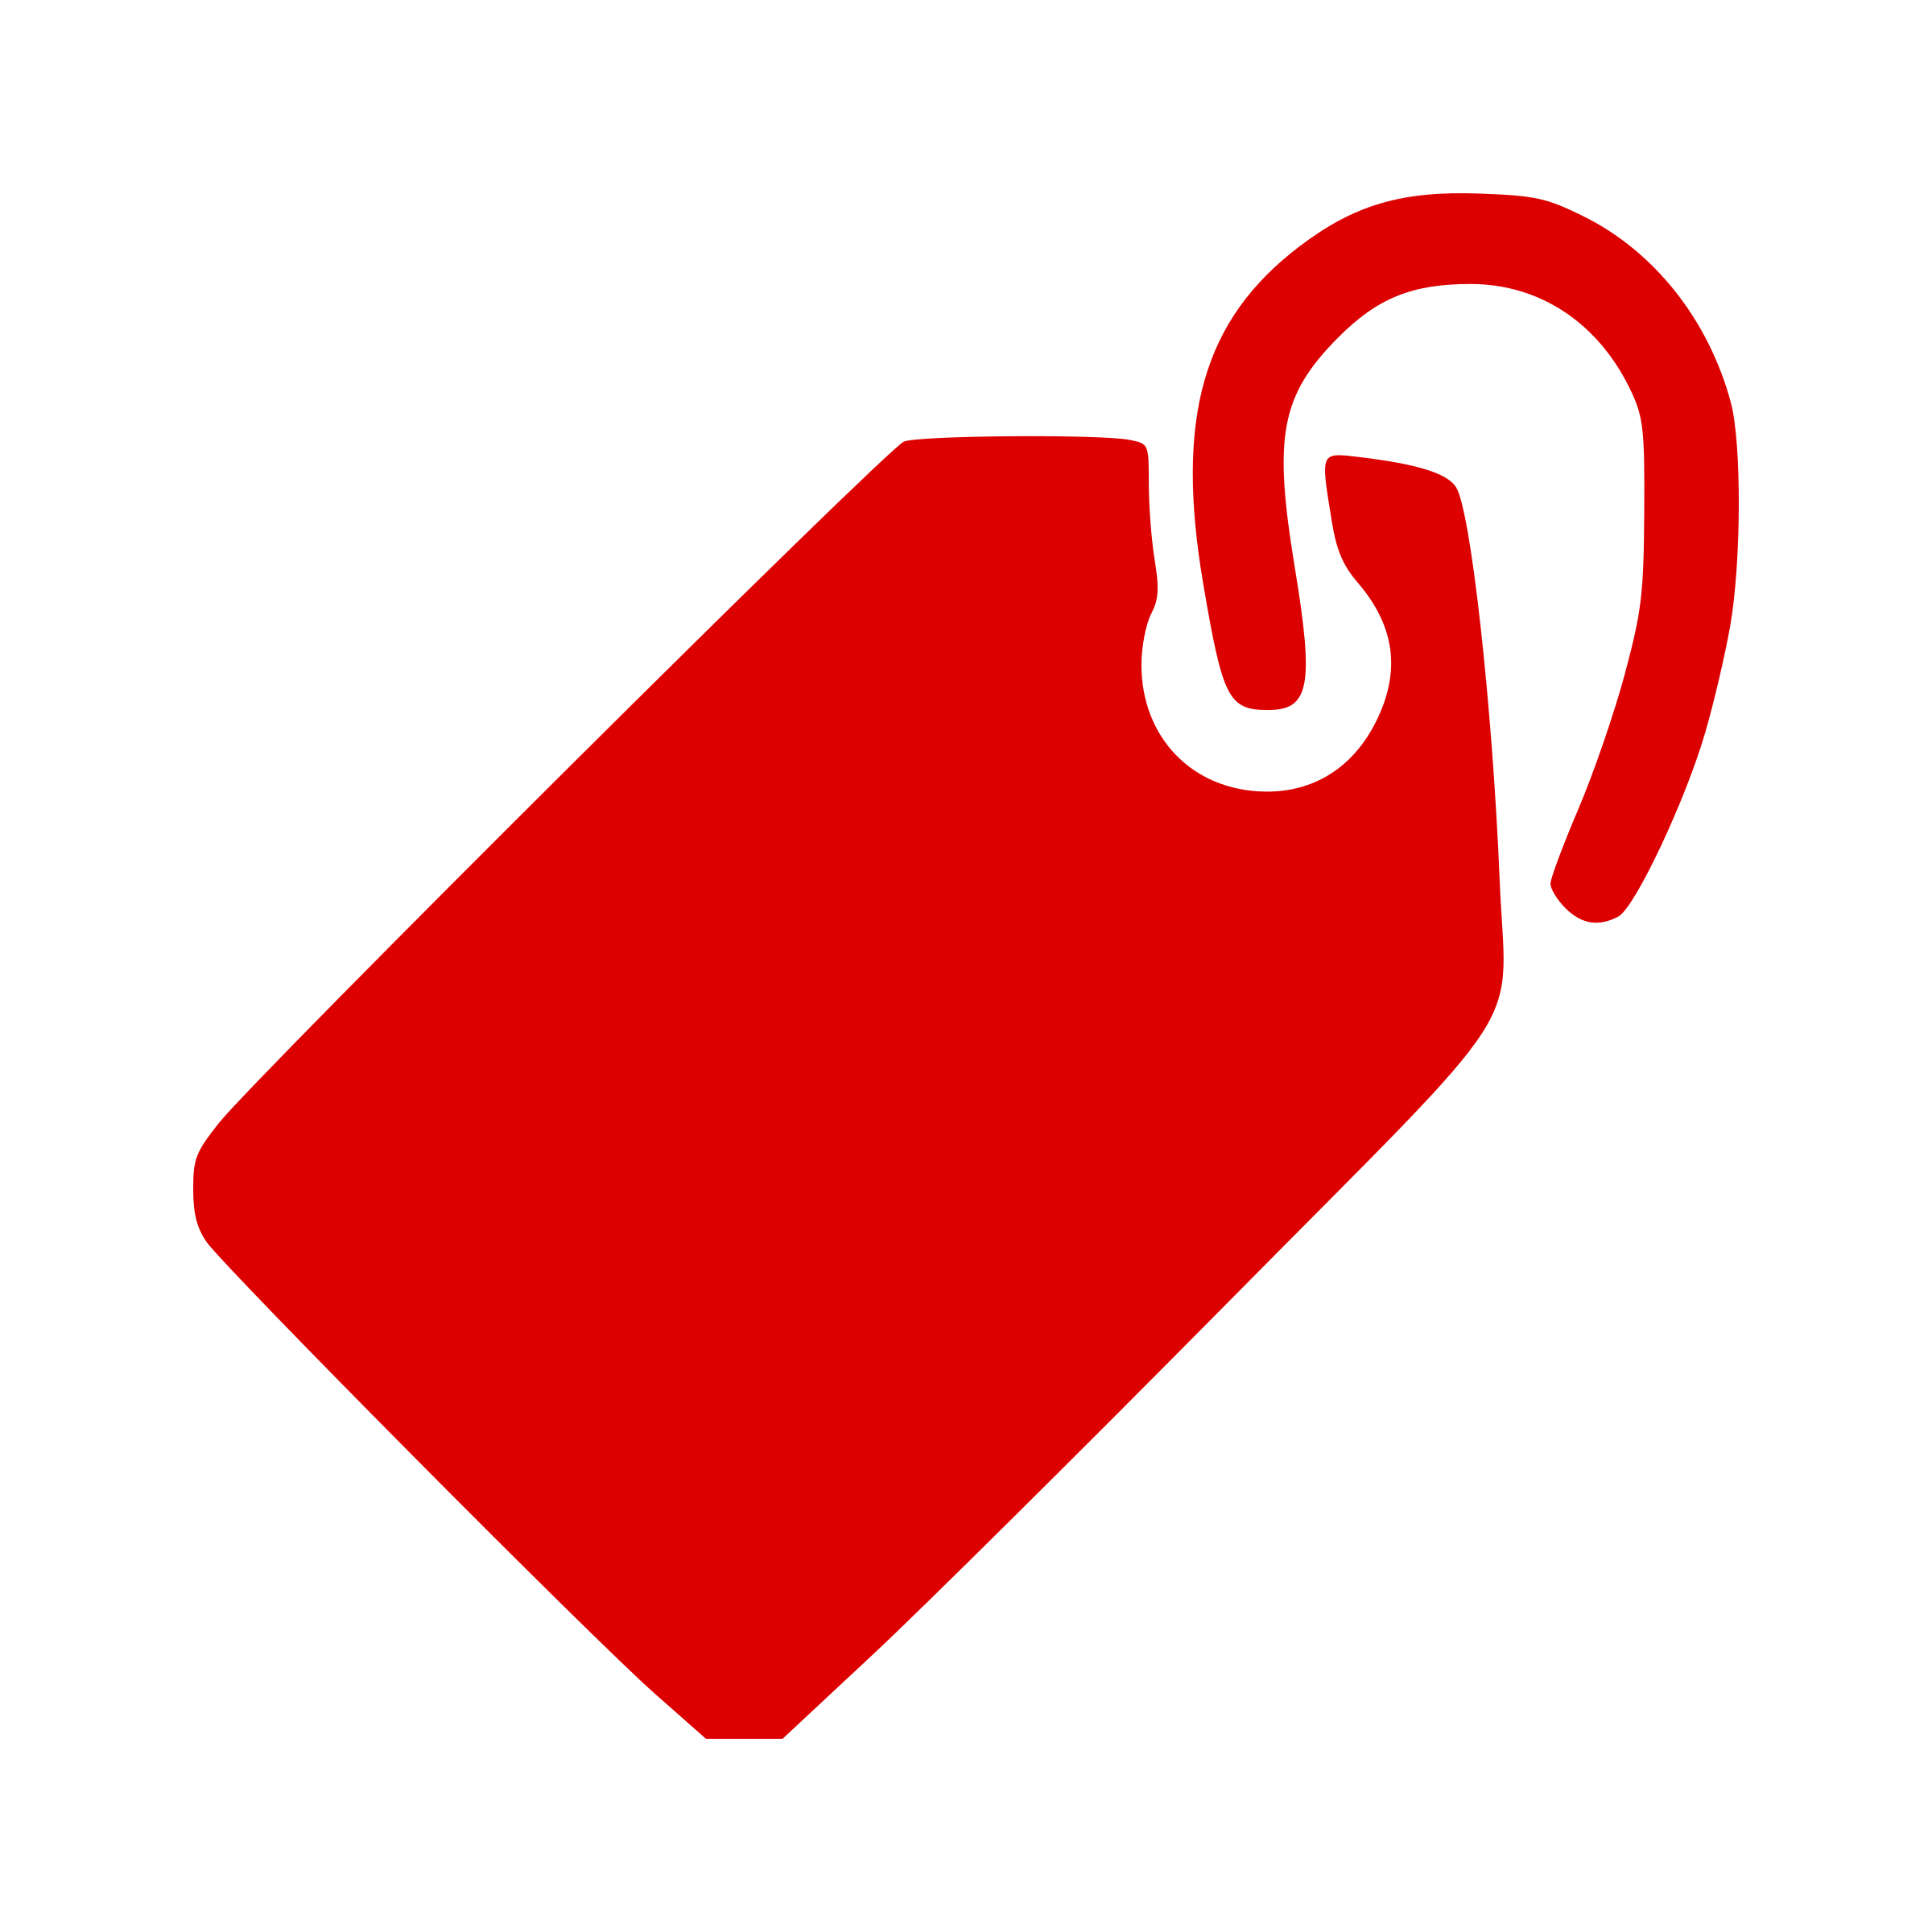 red-tags-vector-clipart-image-free-stock-photo-public-domain-photo